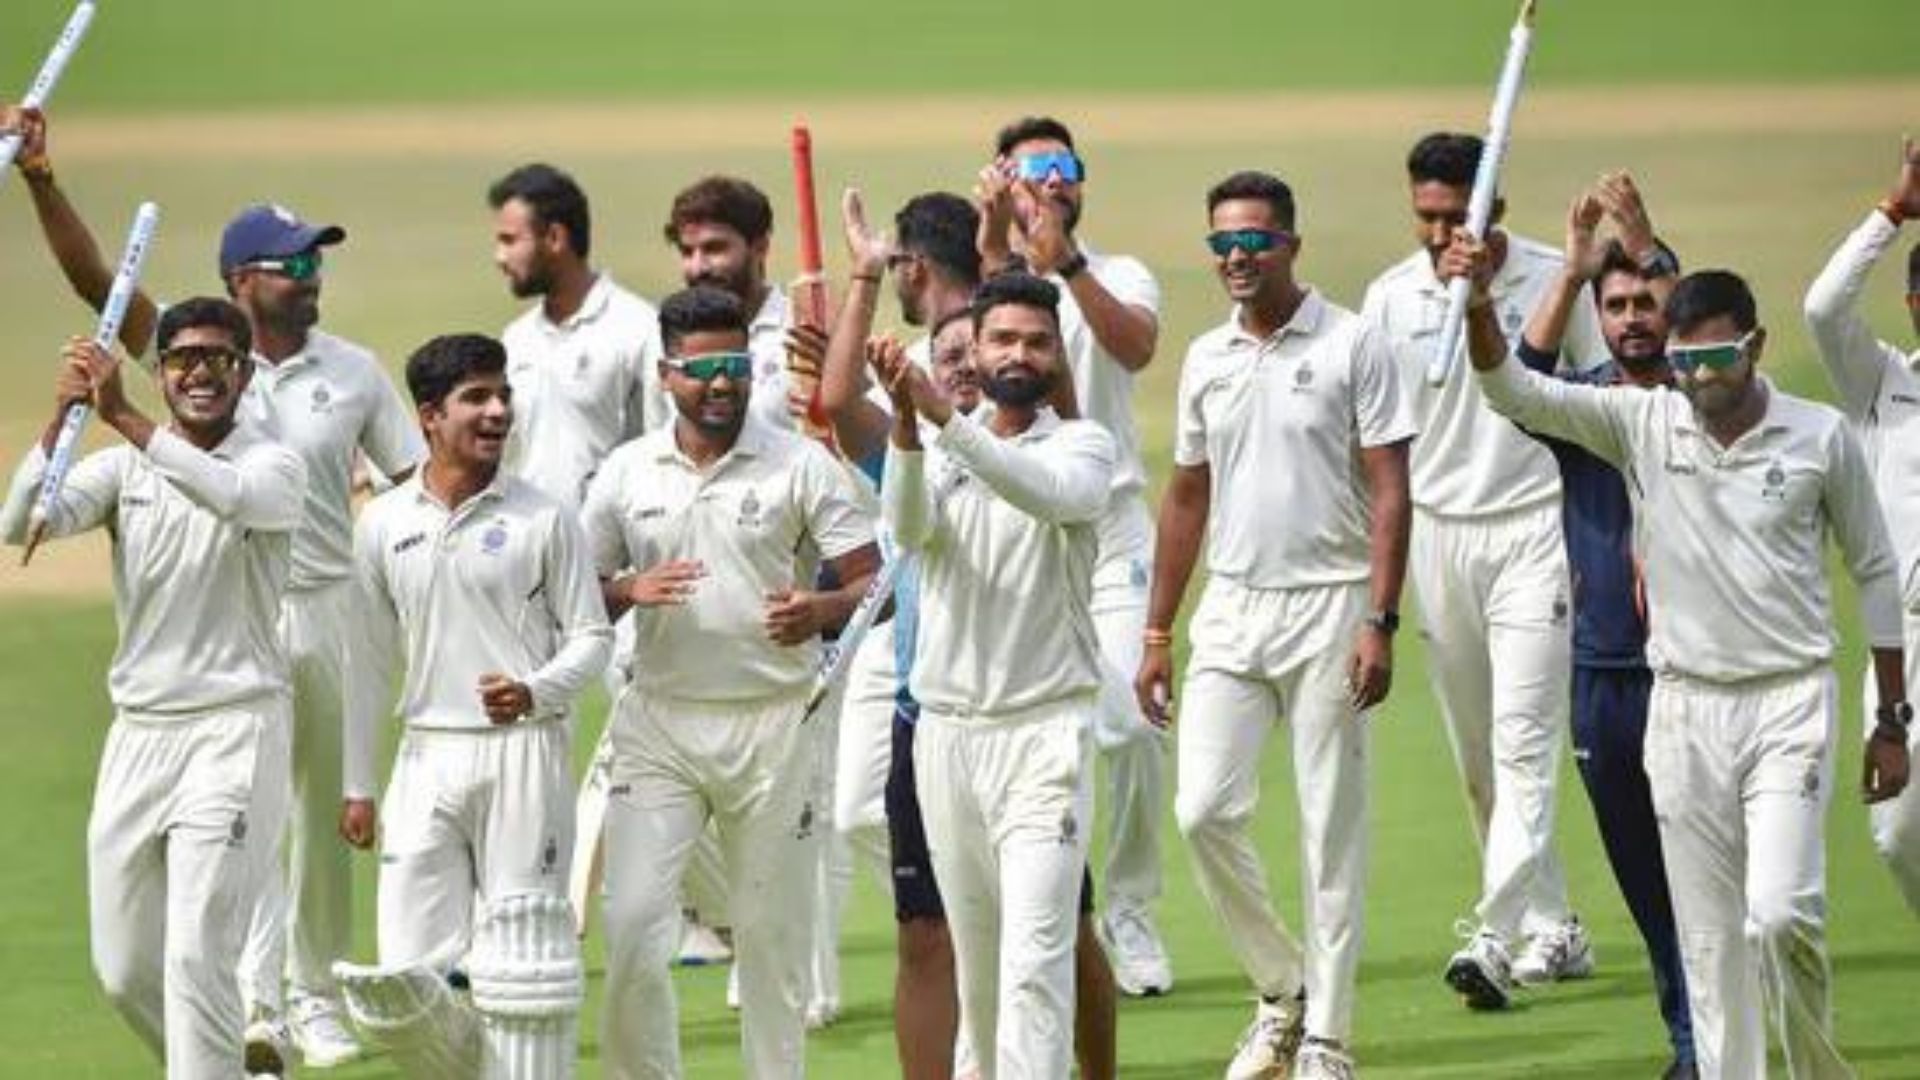 Kumar Kartikeya and other MP players celebrating after historic Ranji Trophy title. (P.C.:BCCI)